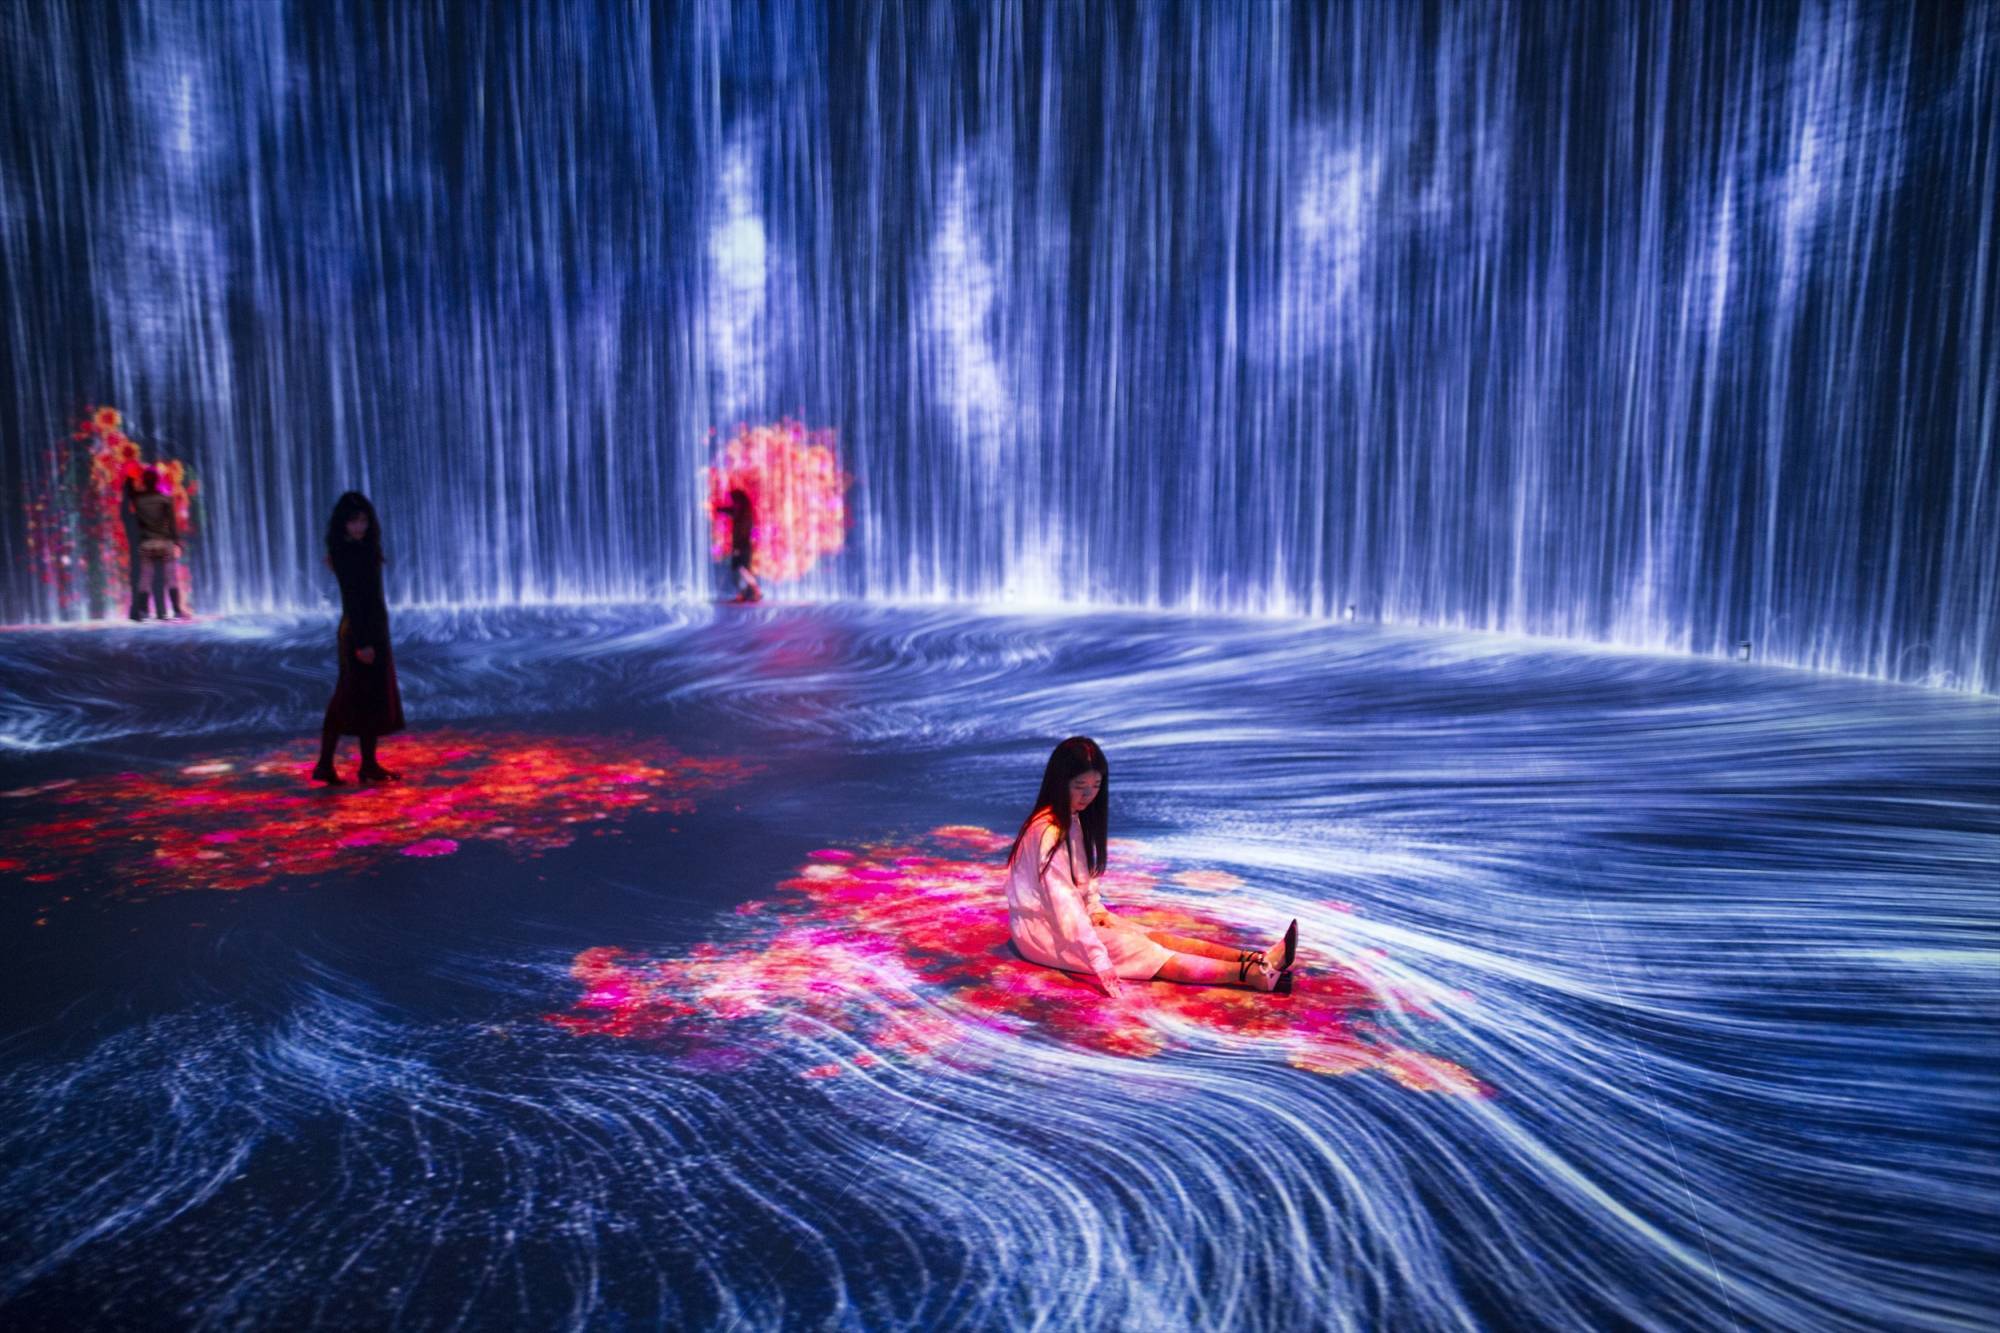 Stills from "Universe of Water Particles in the Tank," a new art installation from teamLab set inside reclaimed oil tanks.